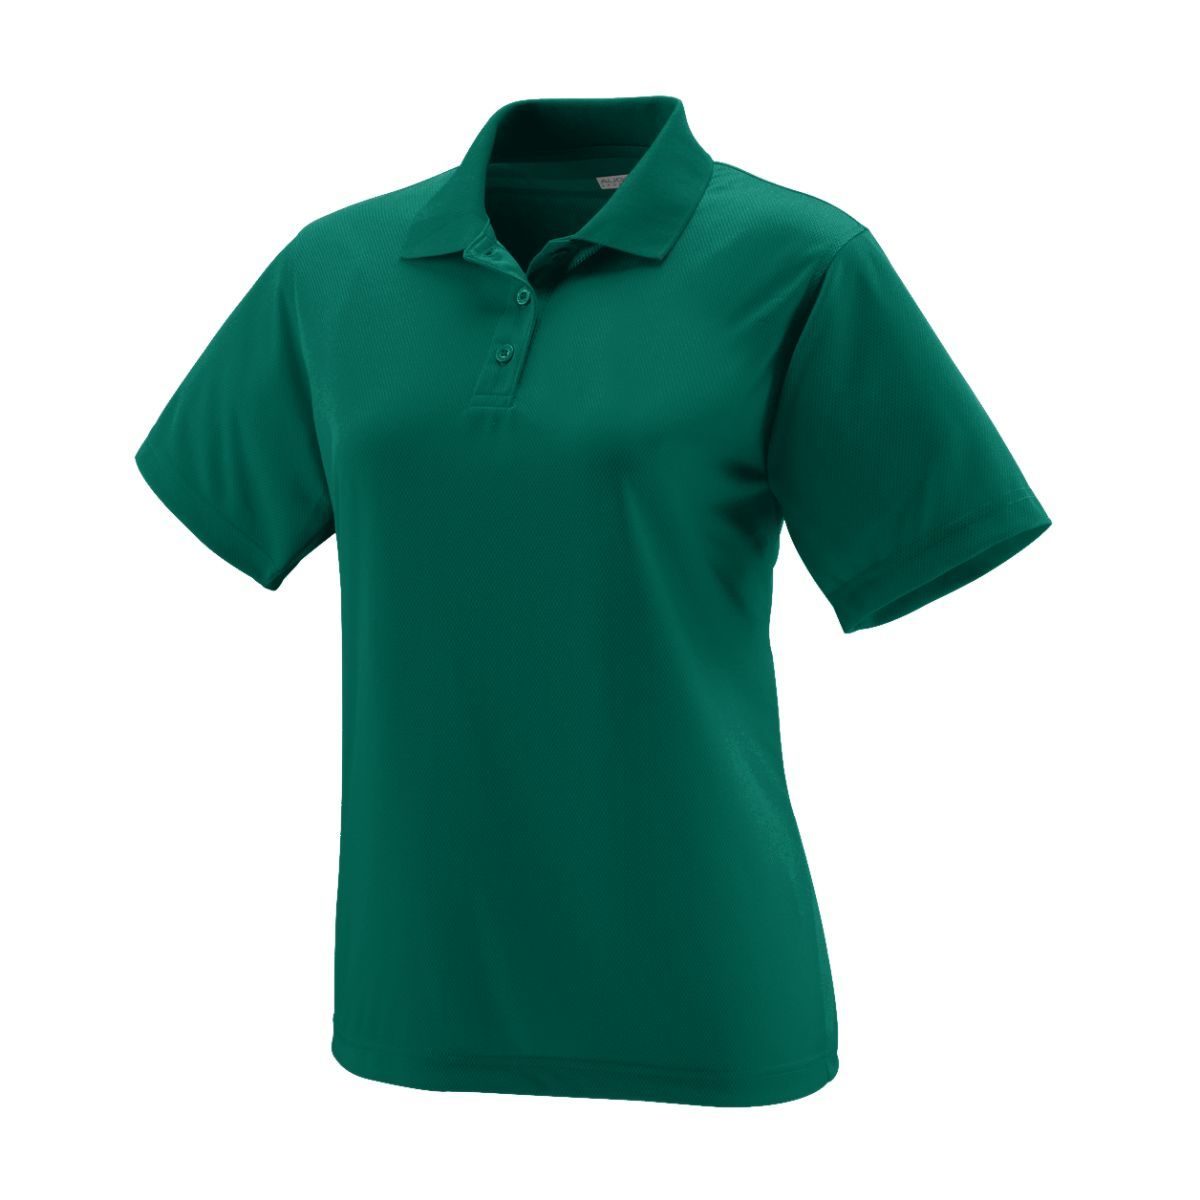 Augusta Sportswear Ladies Wicking Mesh Polo in Dark Green  -Part of the Ladies, Ladies-Polo, Polos, Augusta-Products, Tennis, Shirts product lines at KanaleyCreations.com